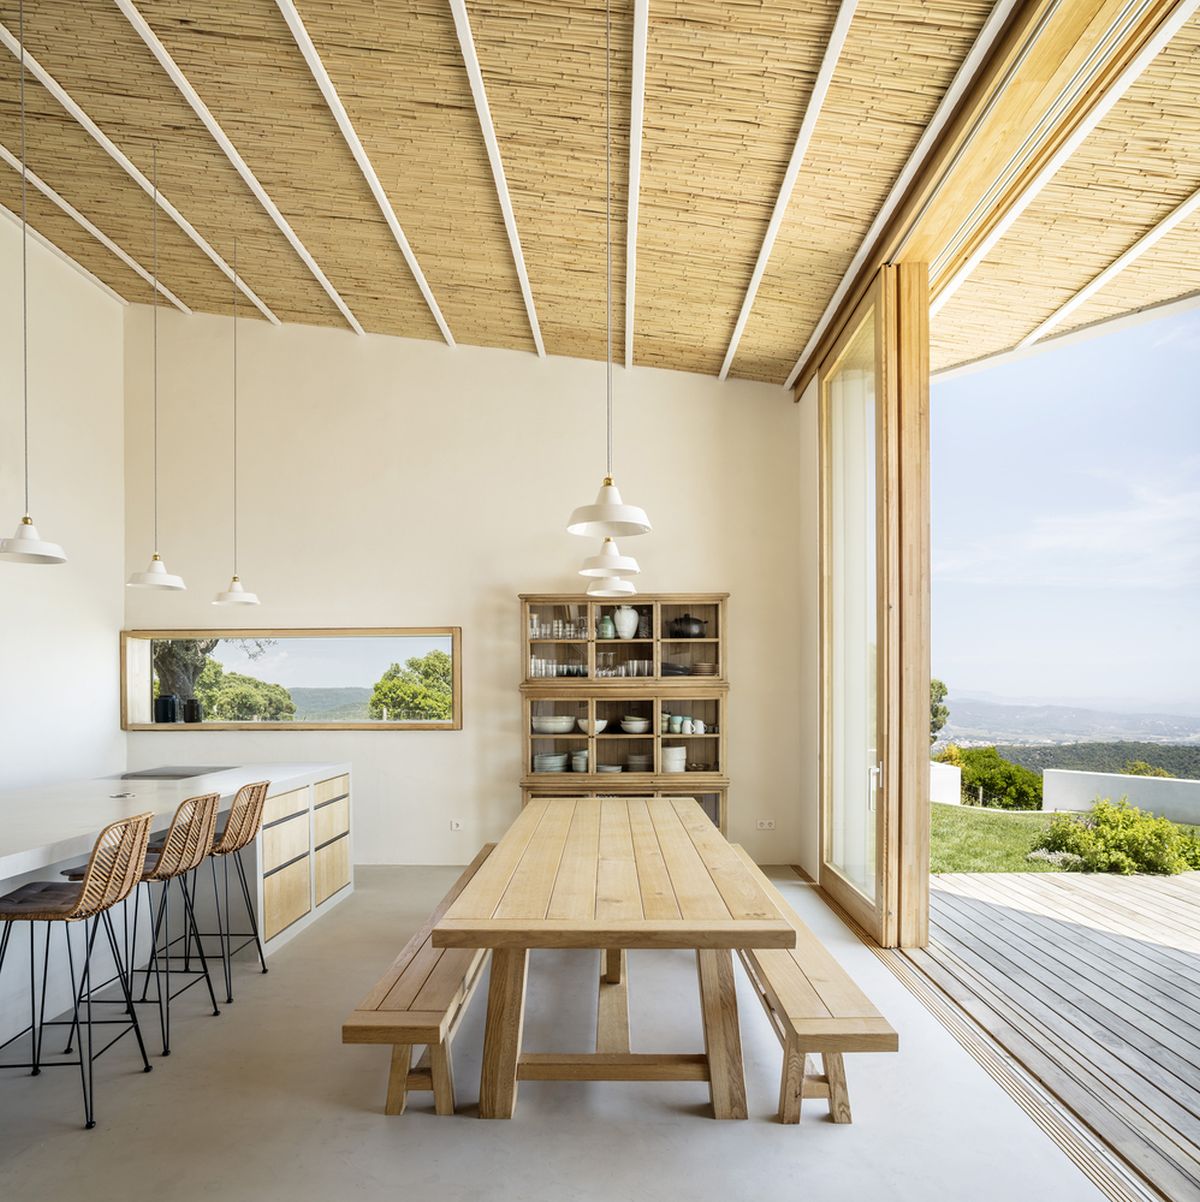 The kitchen and dining area share an open plan and are directly connected to the outdoors